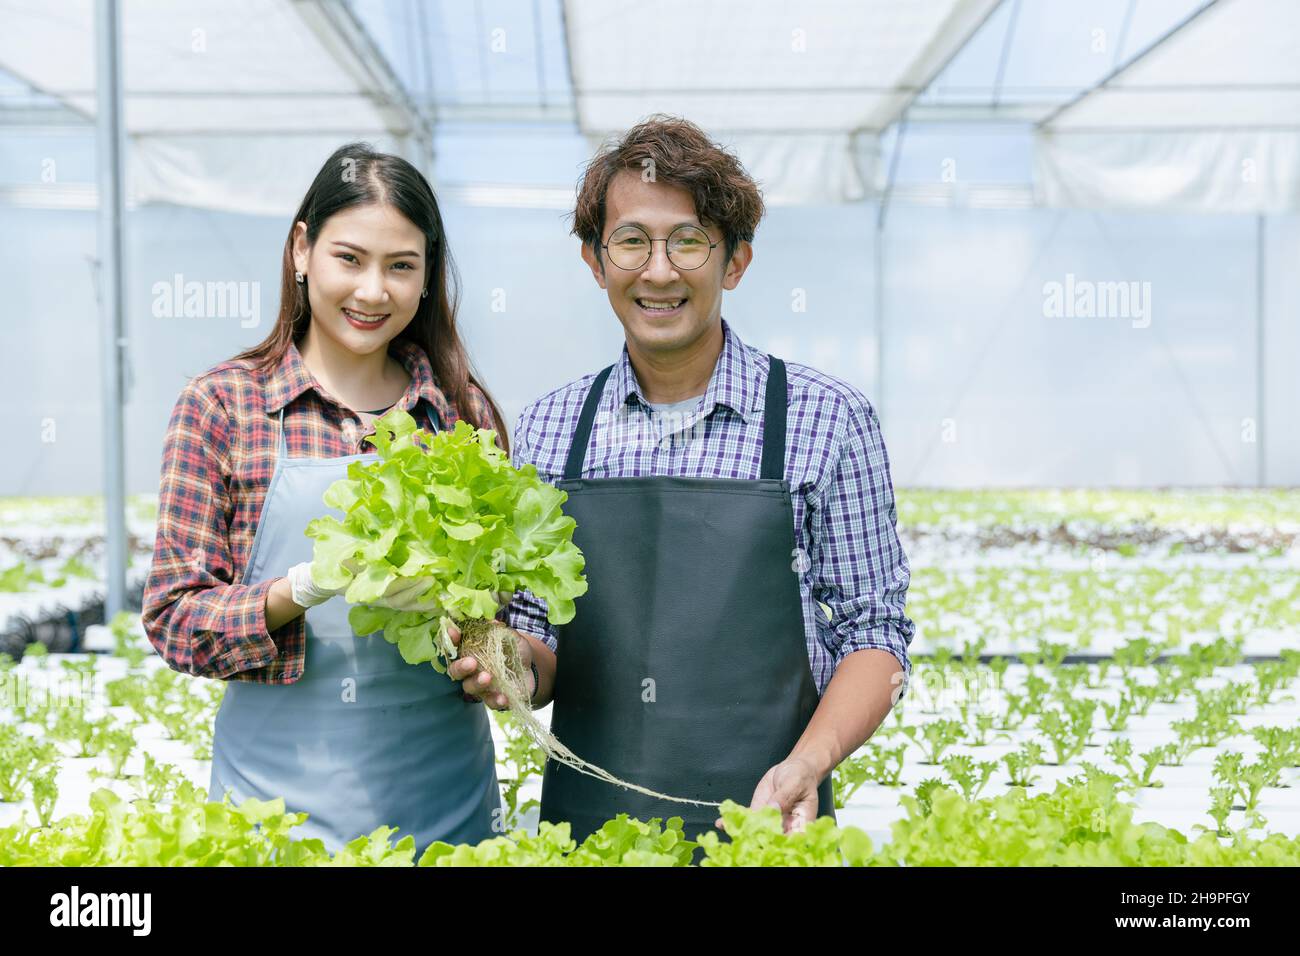 Portrait Organic SME Business Farm Owner, Young Farmer in Agriculture Industry. Stock Photo